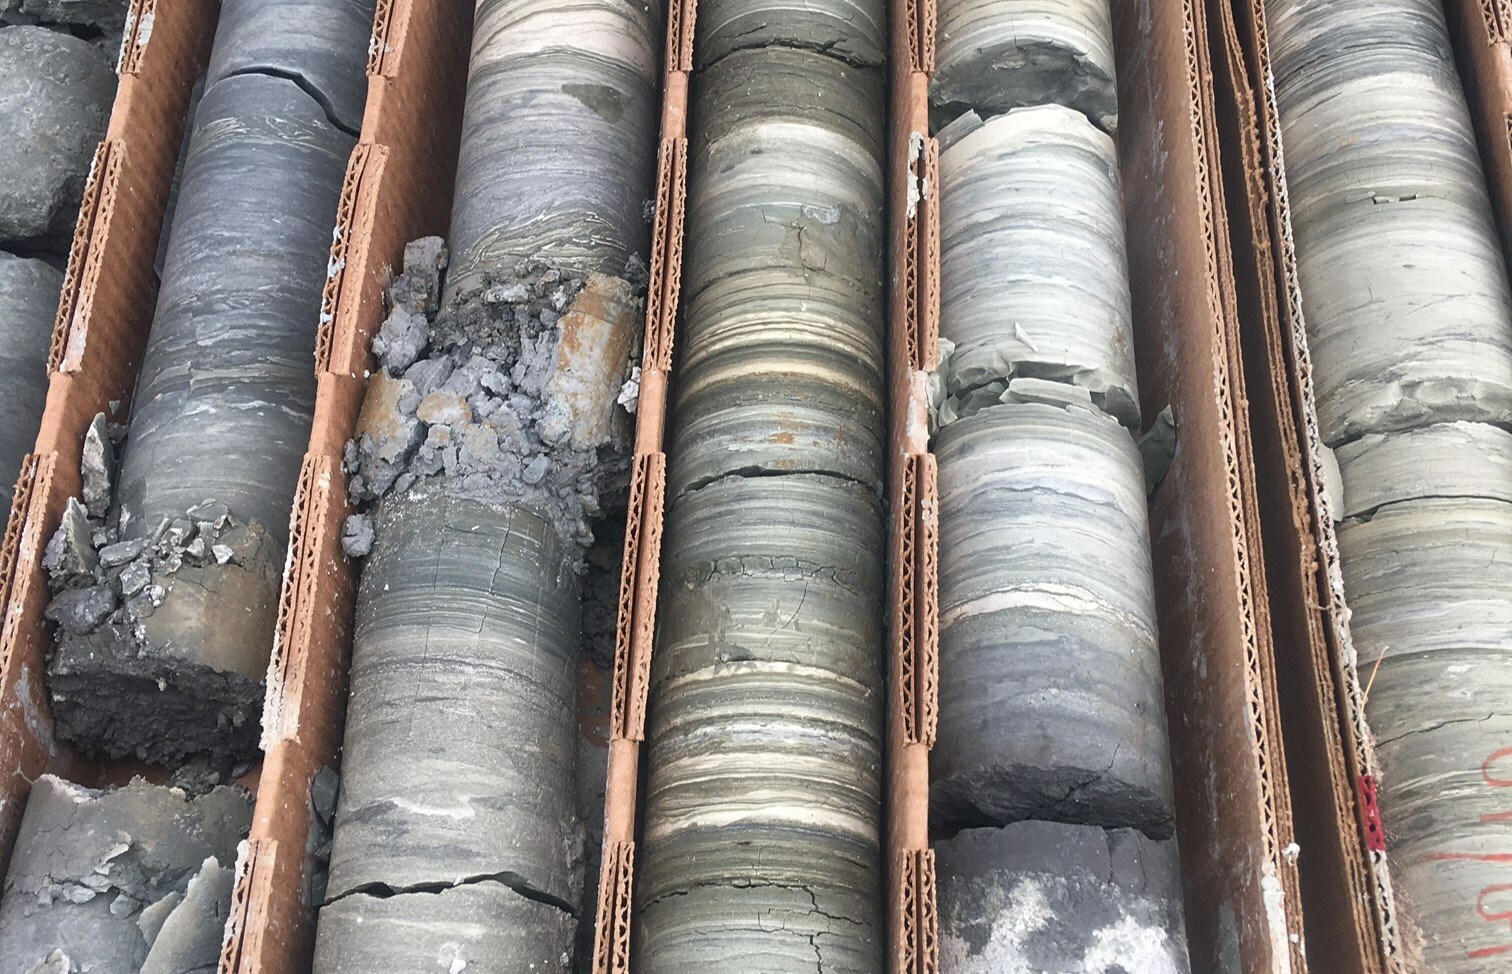 Core samples collected from American Battery Technology Company’s Tonopah Flats Lithium Project near Tonopah, Nevada.  This project is one of the largest known lithium projects in the United States, with a total quantified resource of 21.15 million tons of lithium hydroxide monohydrate.